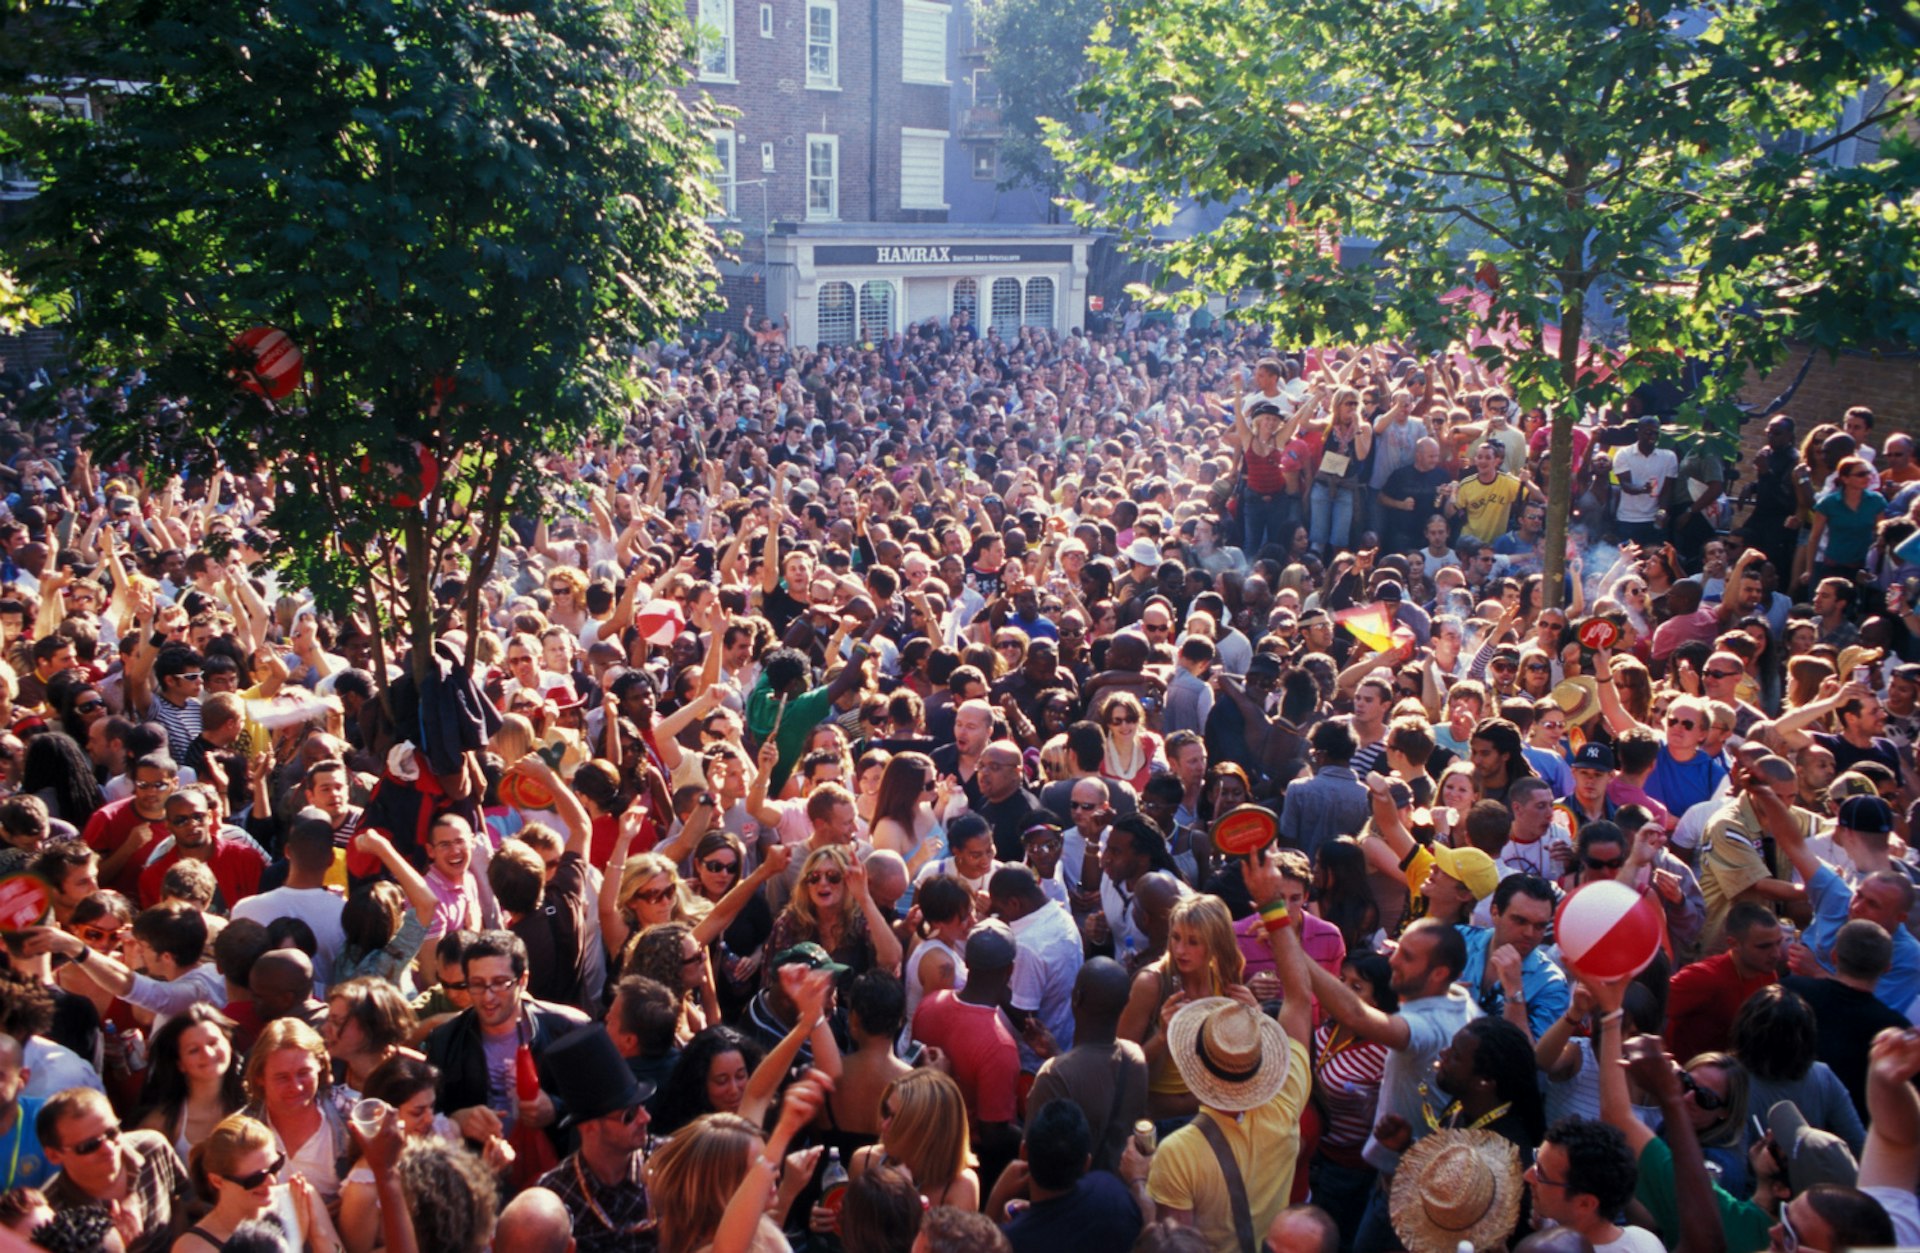 Crowds at the Notting Hill Carnival. Diverse Images/UIG / Universal Images Group / Getty Images